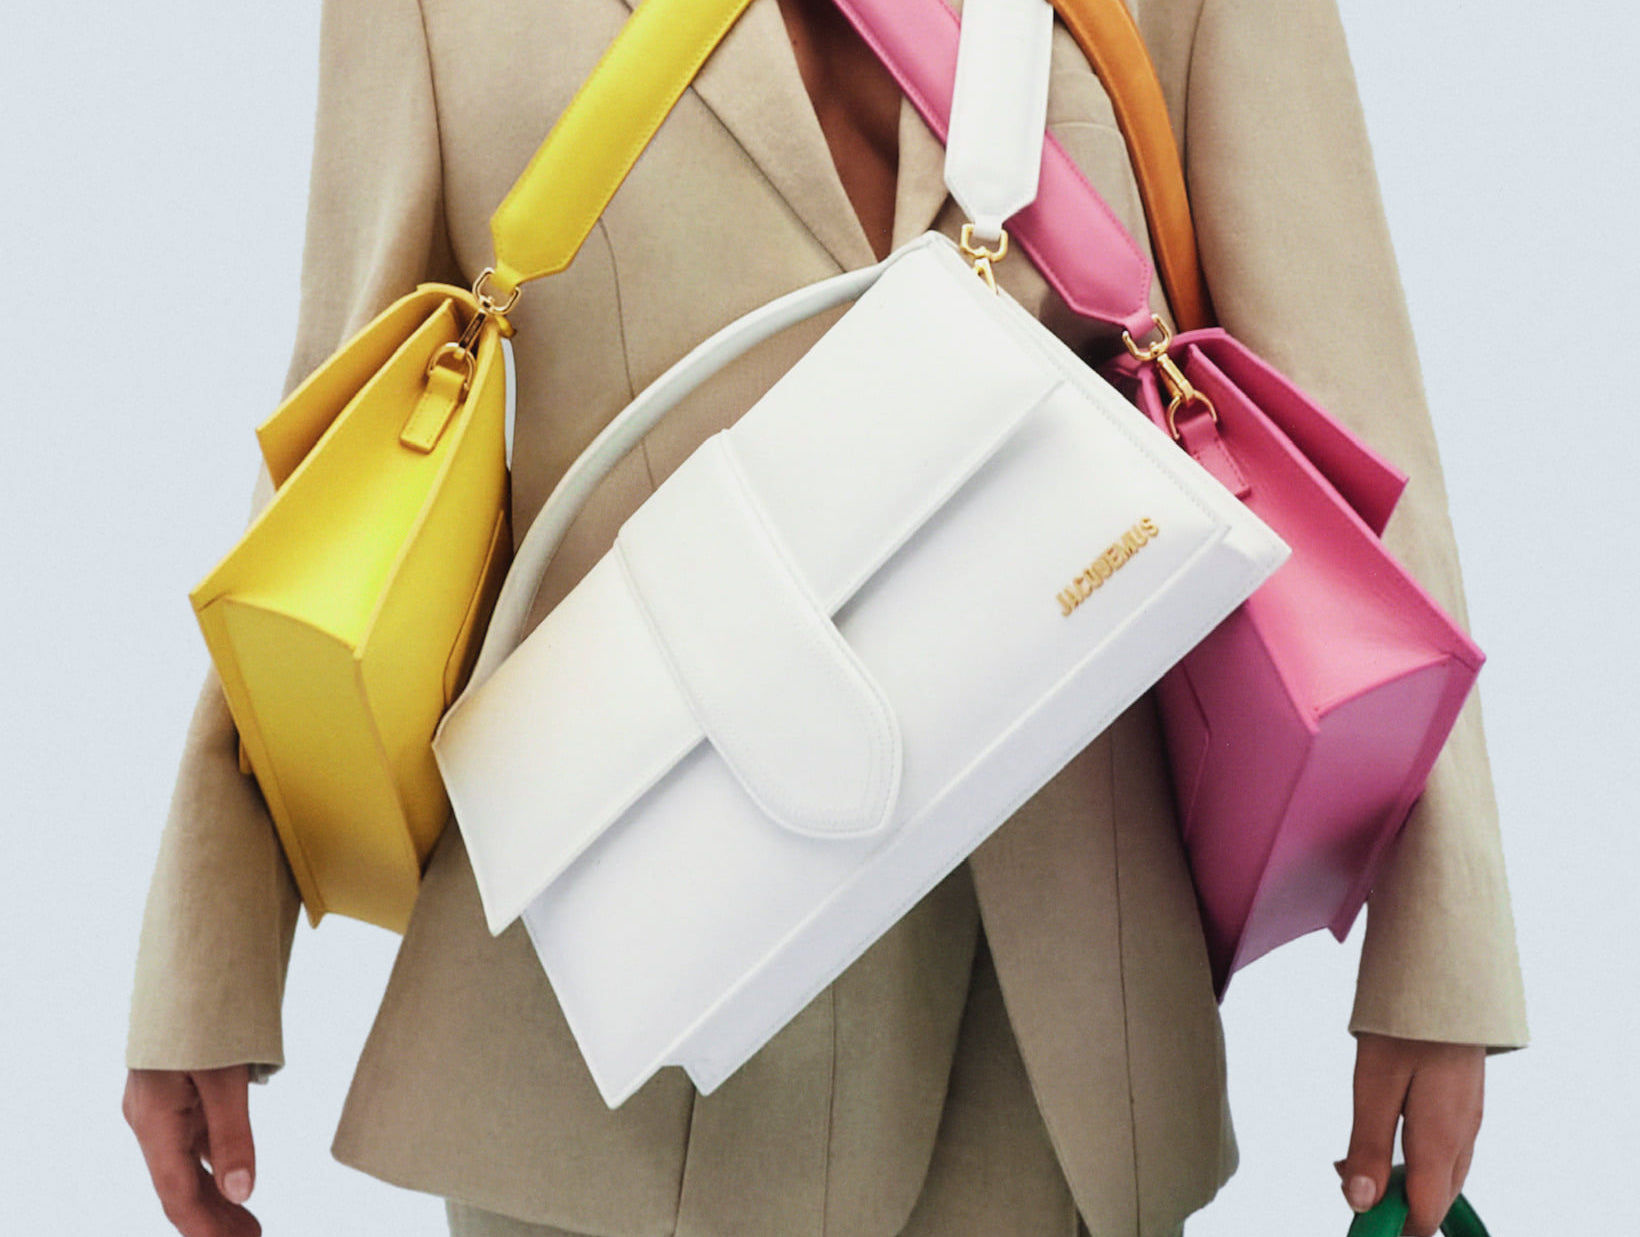 The Micro Purse Trend May Be On Its Way Out